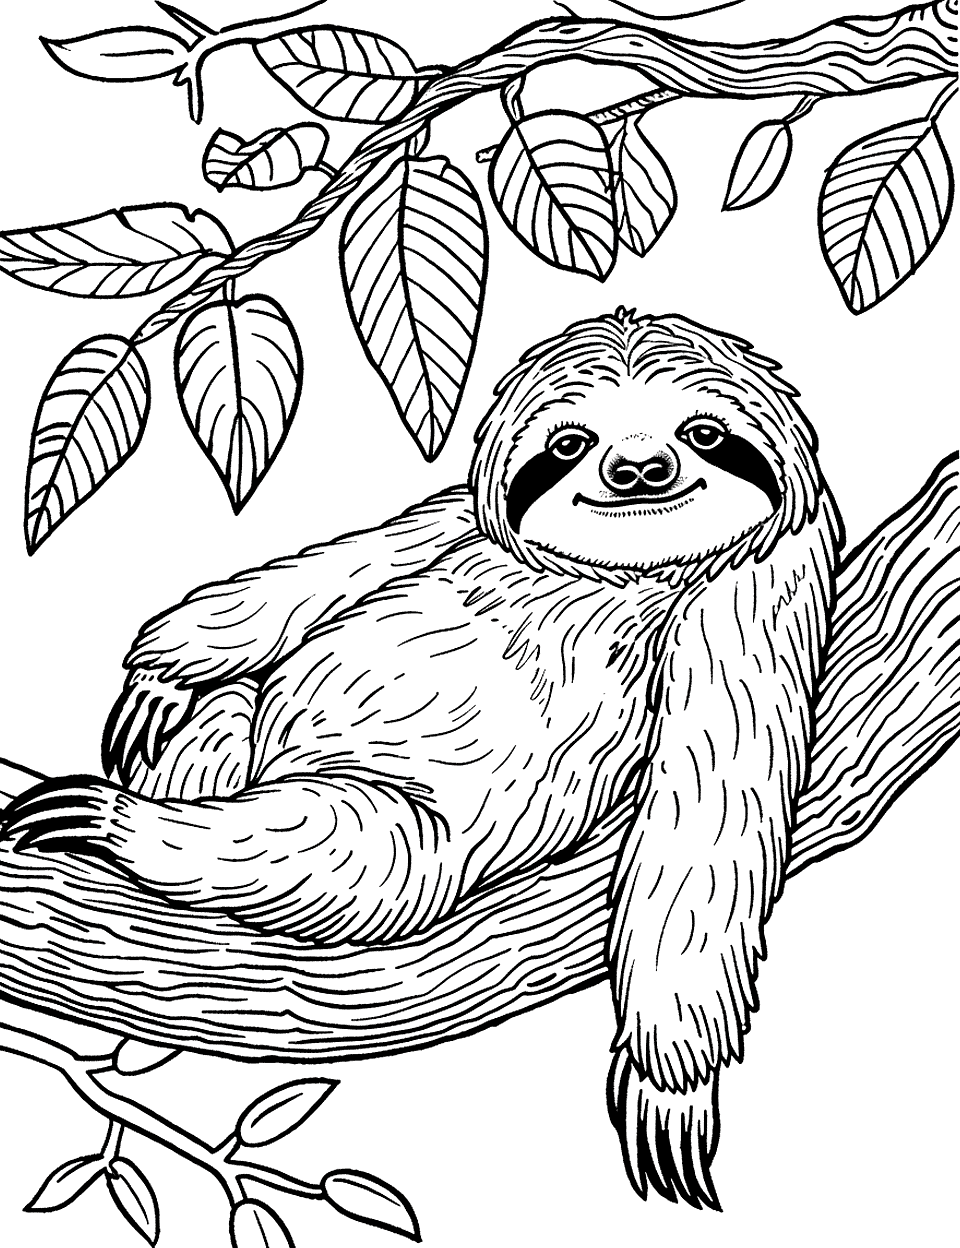 Lazy Day for a Sloth Coloring Page - A sloth sprawled out, looking very relaxed on a branch.